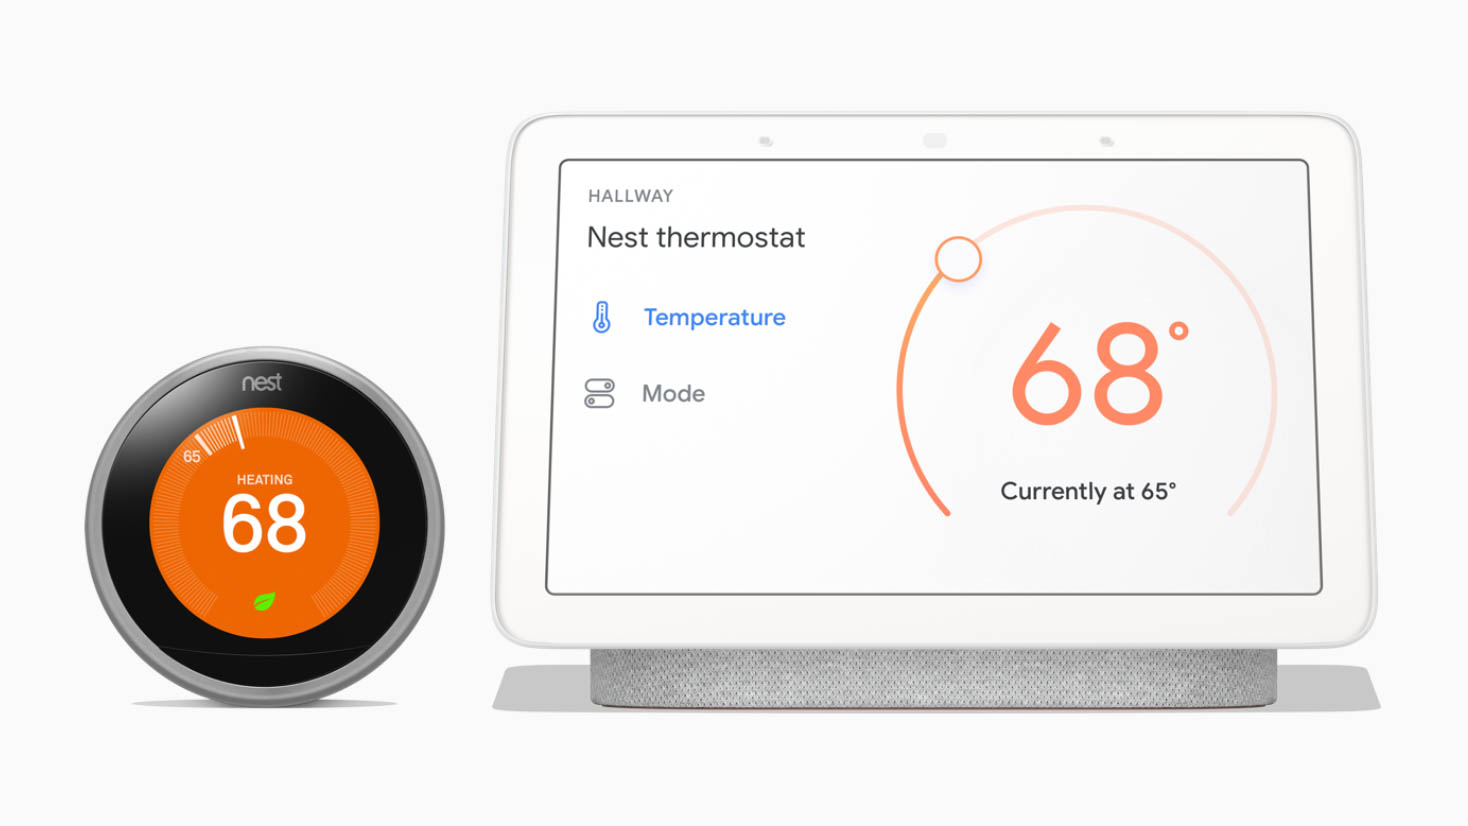 Google Home Hub serves as a dashboard for a broad range of connected home accessories. Nest products are well integrated. Image: Google.